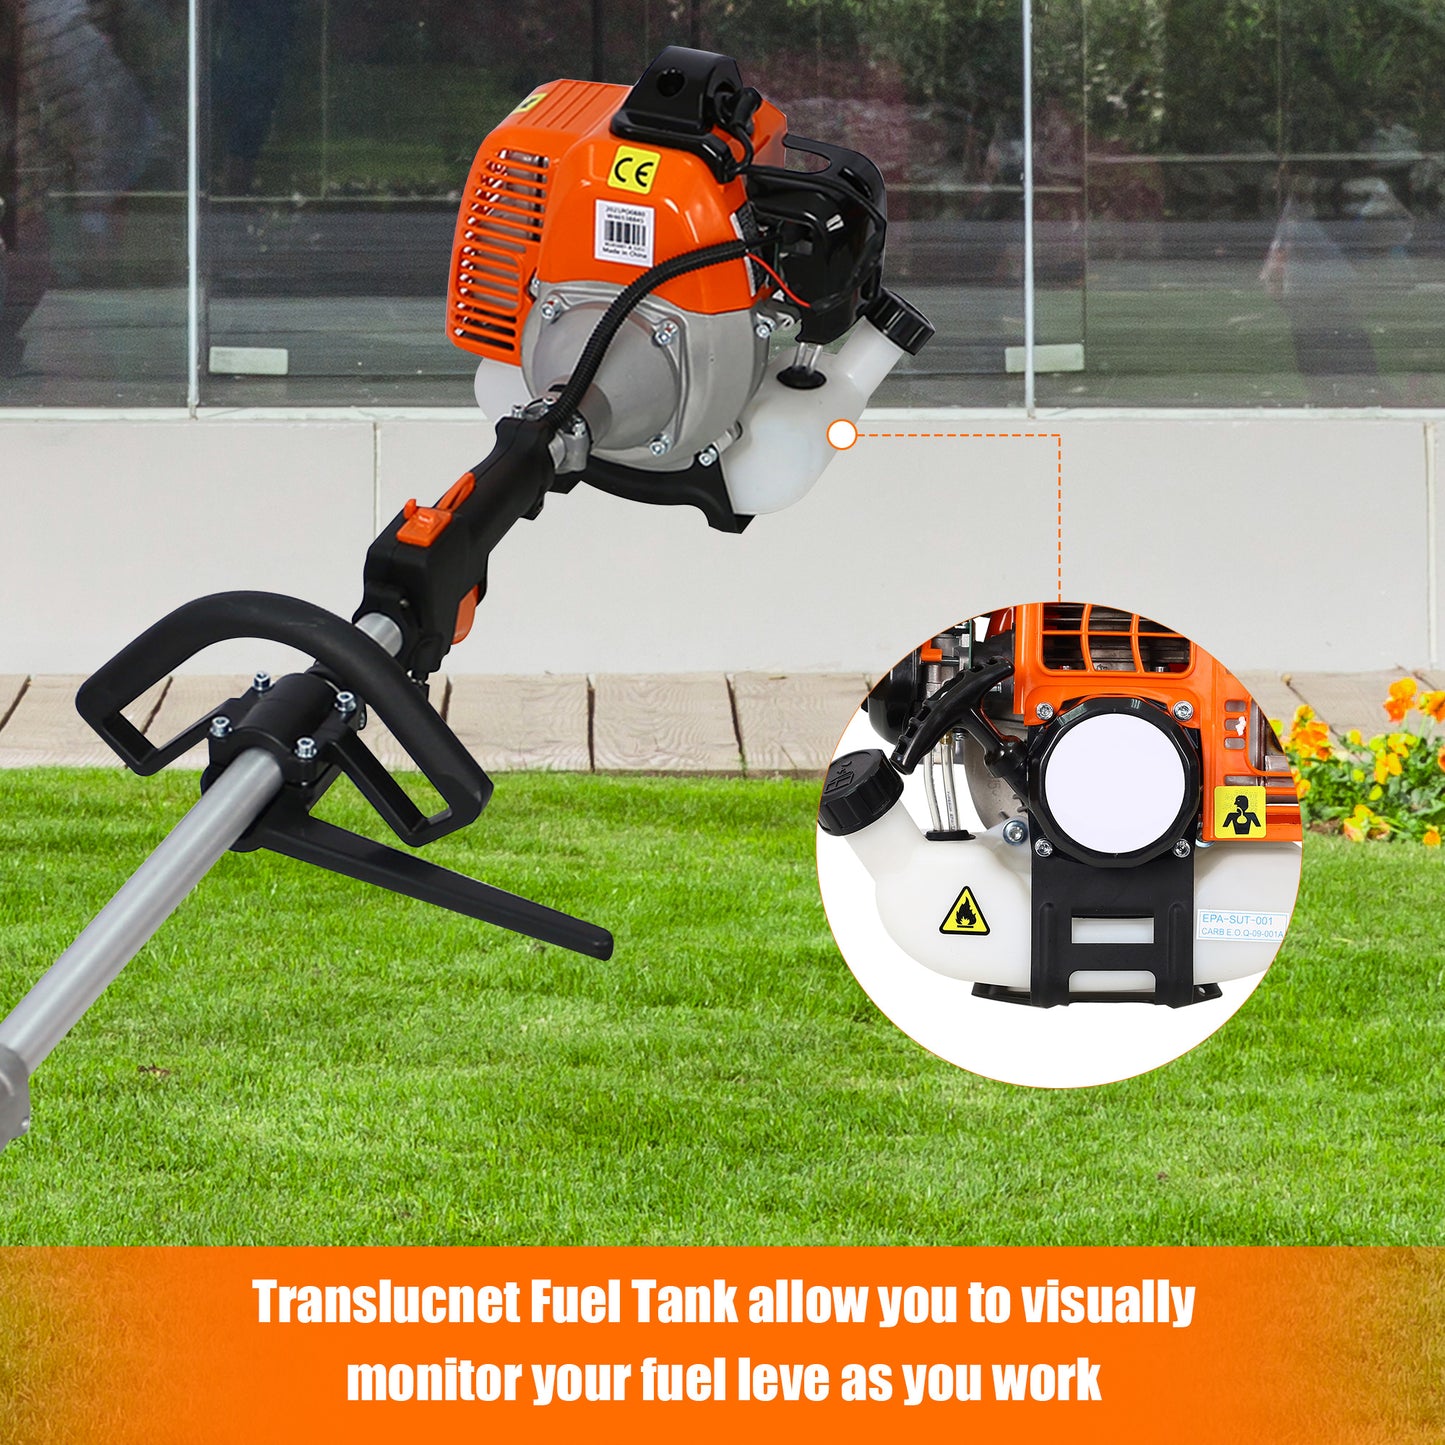 4-in-1 Grass Trimmer Weed Eater Combos, 33CC 2-Cycle Full Crank Shaft Gas Powered Weed Eater with Gas Pole Saw, Hedge Trimmer and Brush Cutter, Grass Trimming Tool for Garden, Lawn Care, Y014